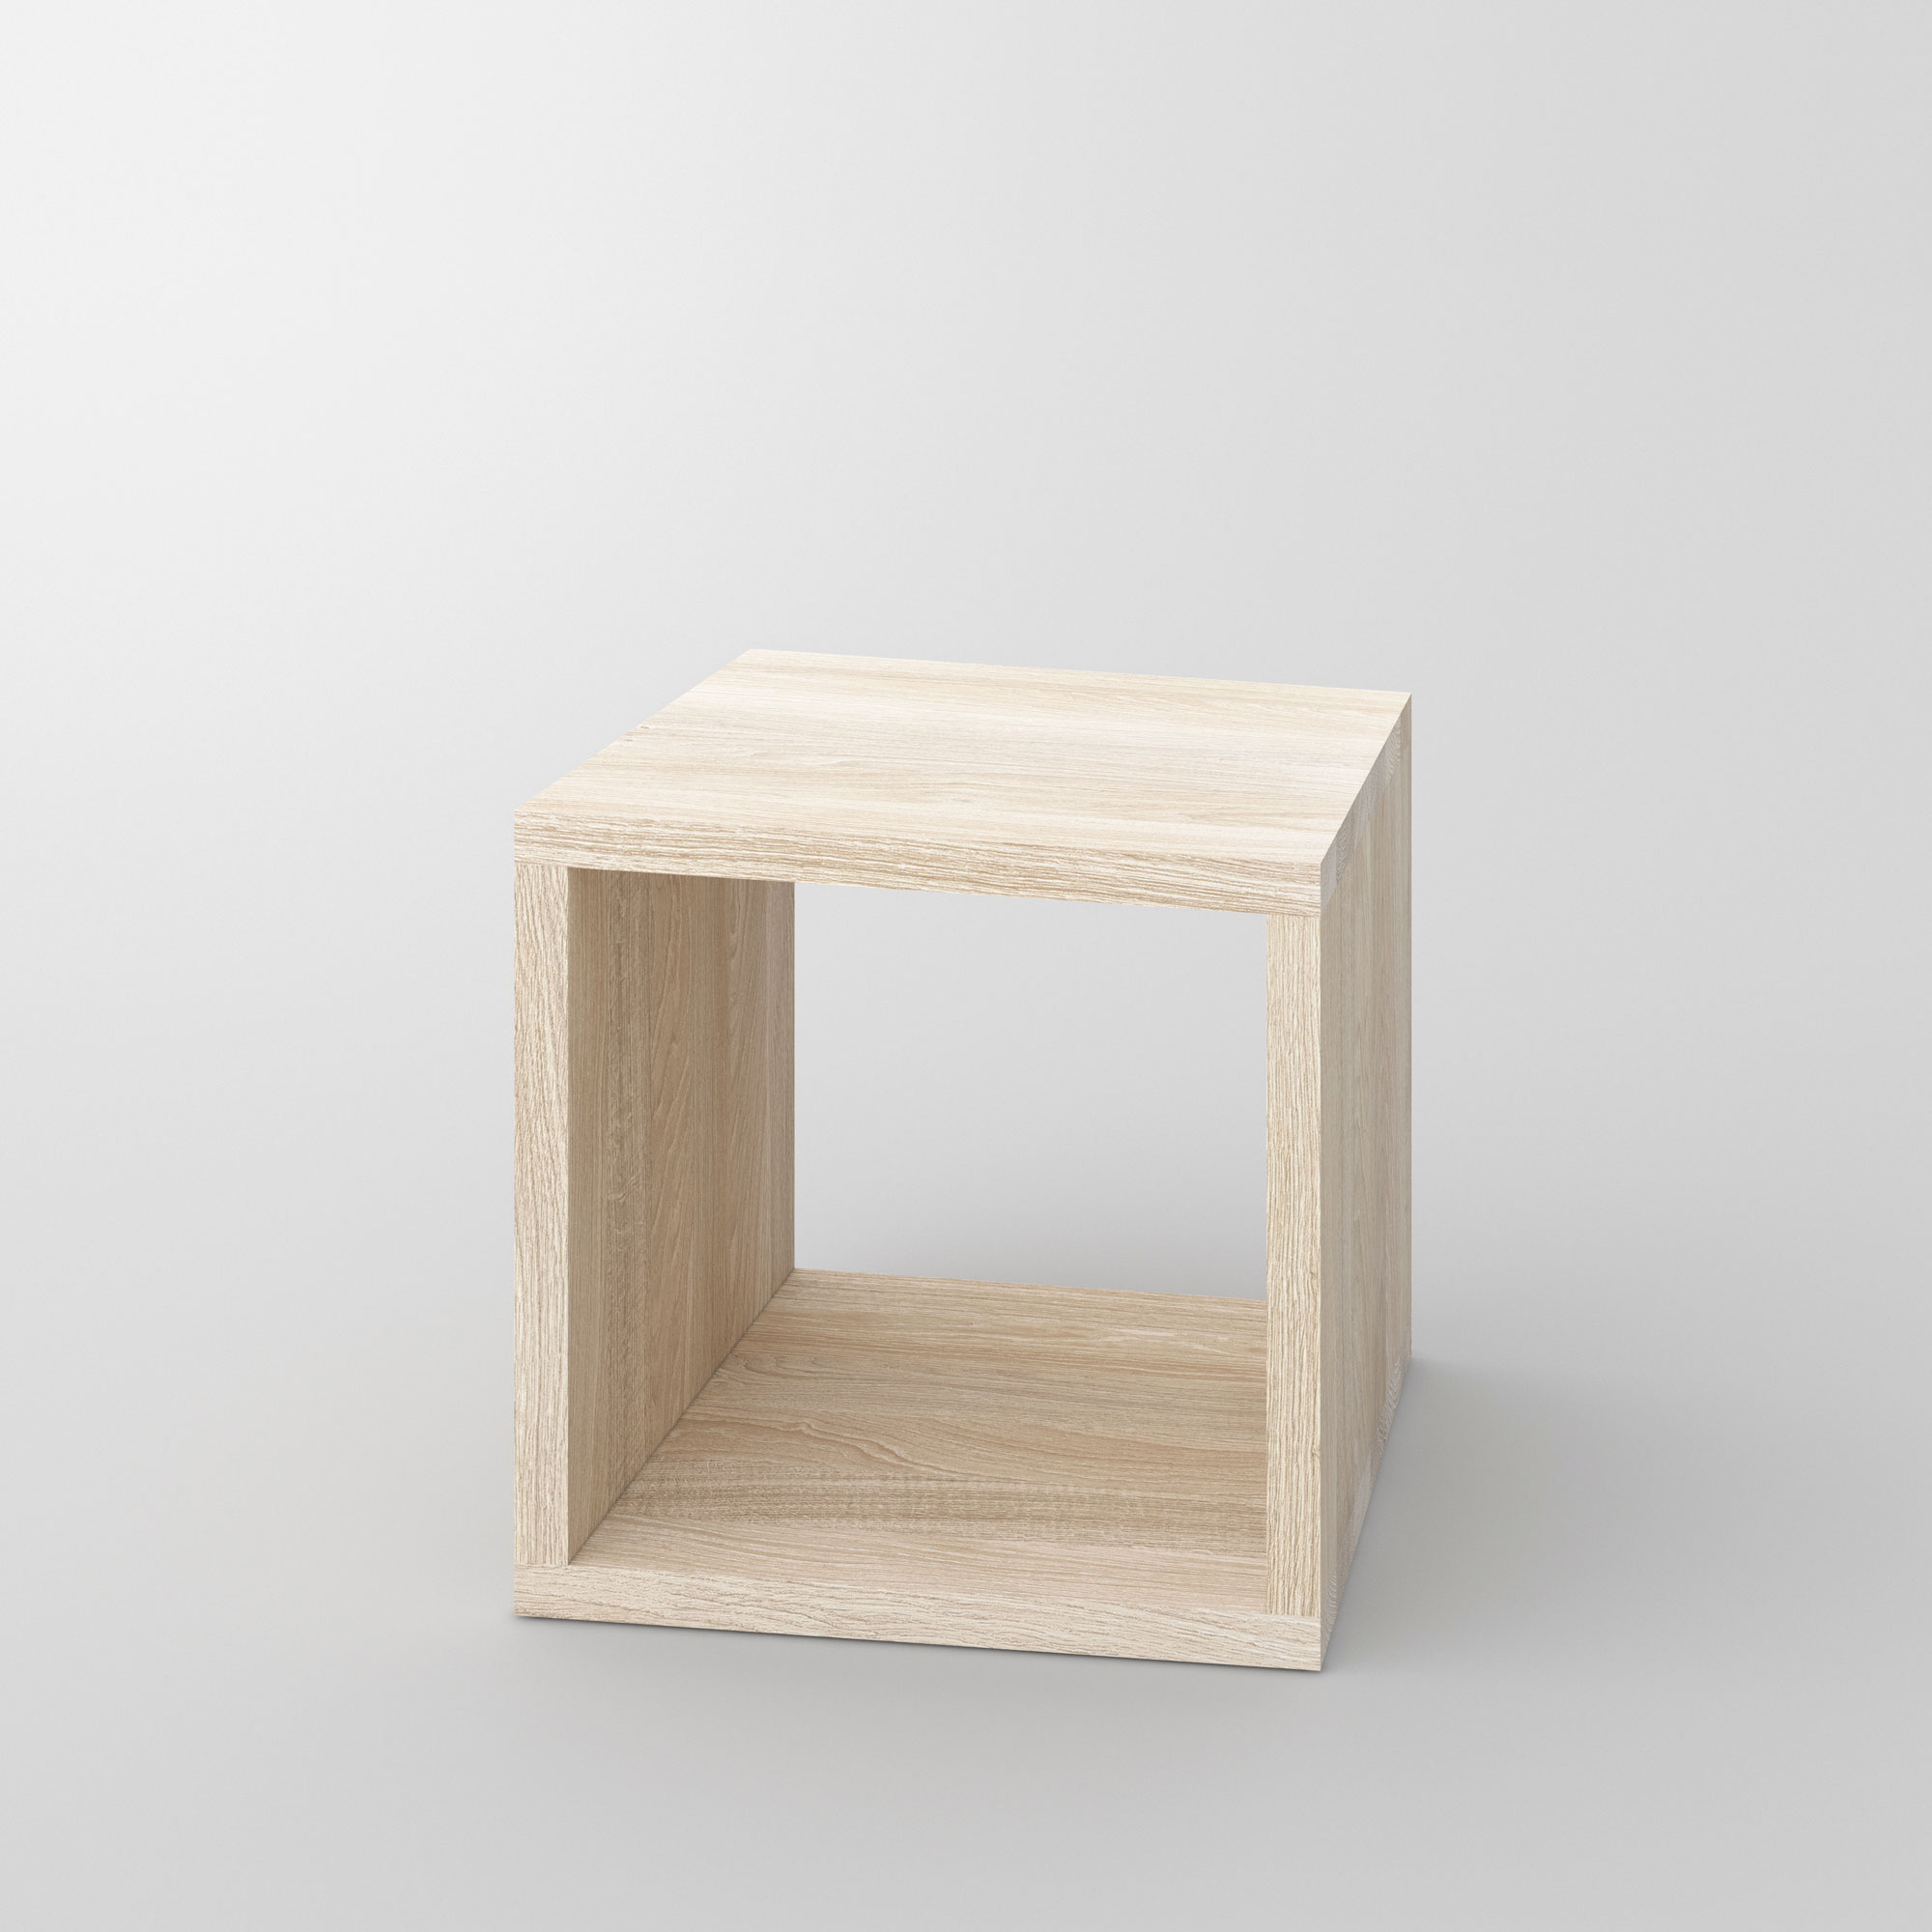 Multifunctional Wooden Coffee Table MENA B 3 cam2 custom made in solid wood by vitamin design